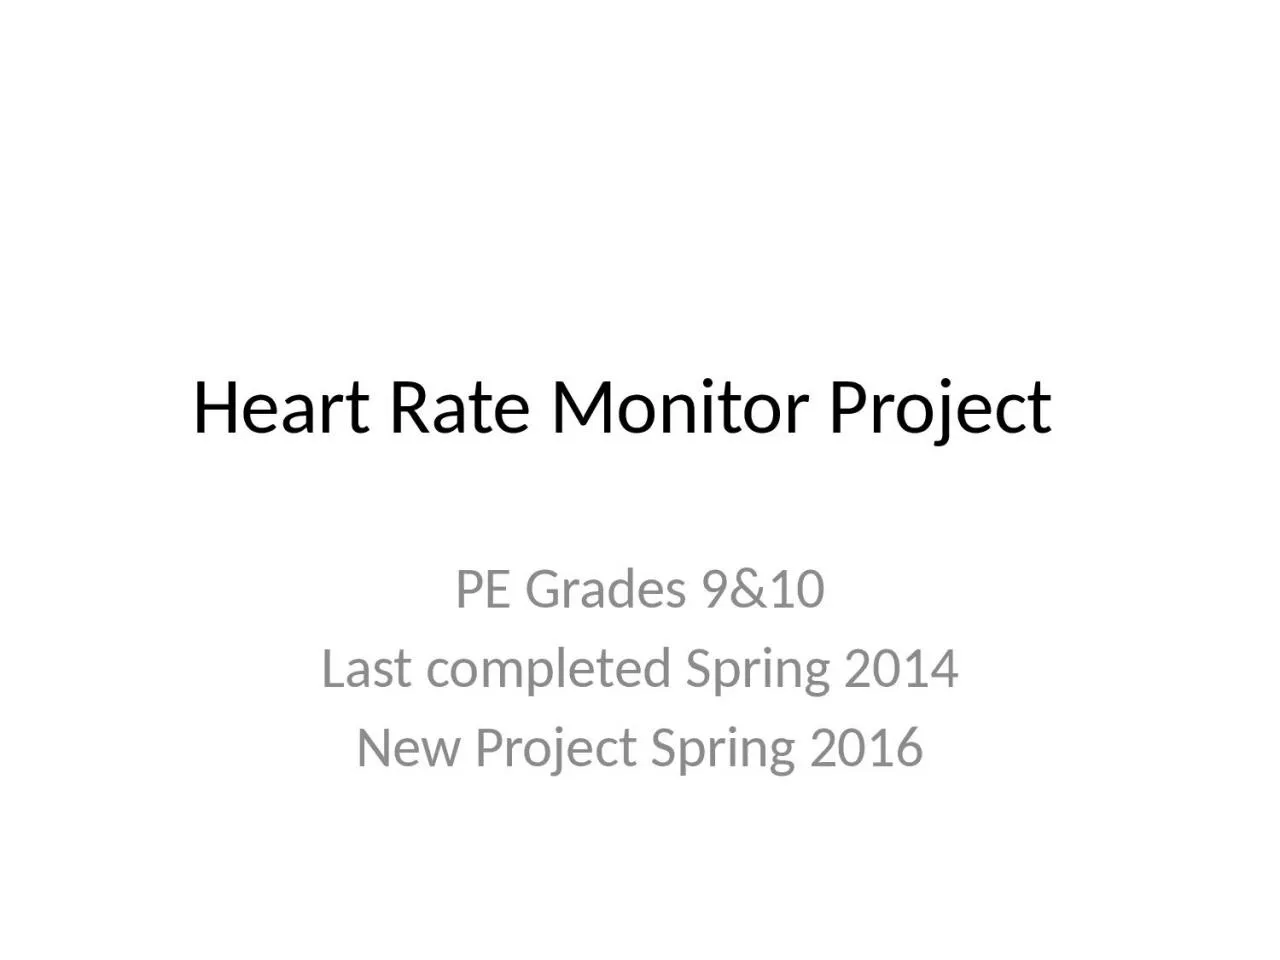 Heart Rate Monitor Project